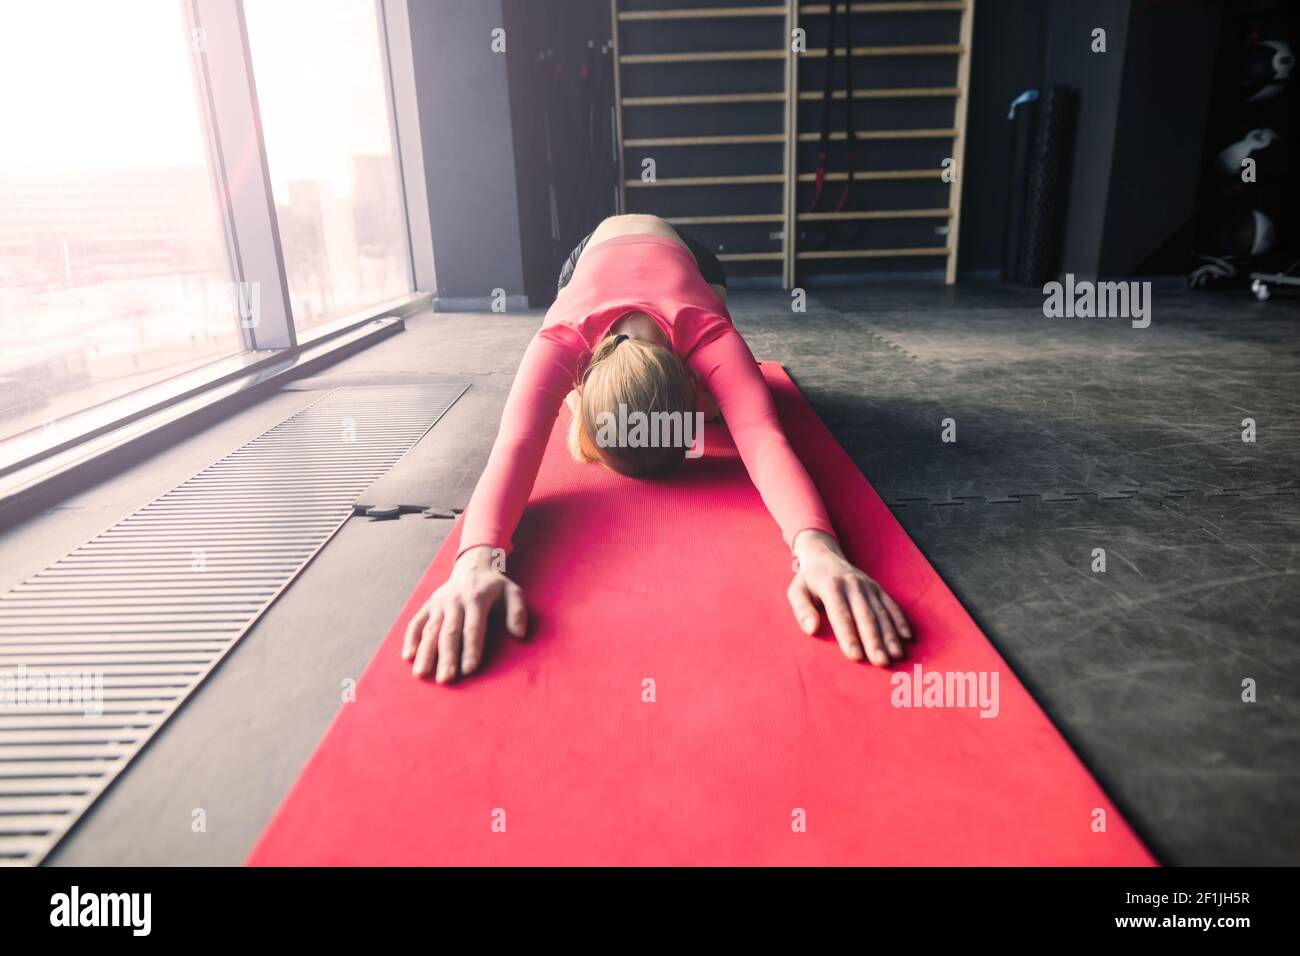 Woman practicing advanced yoga on mat against a large window Stock Photo